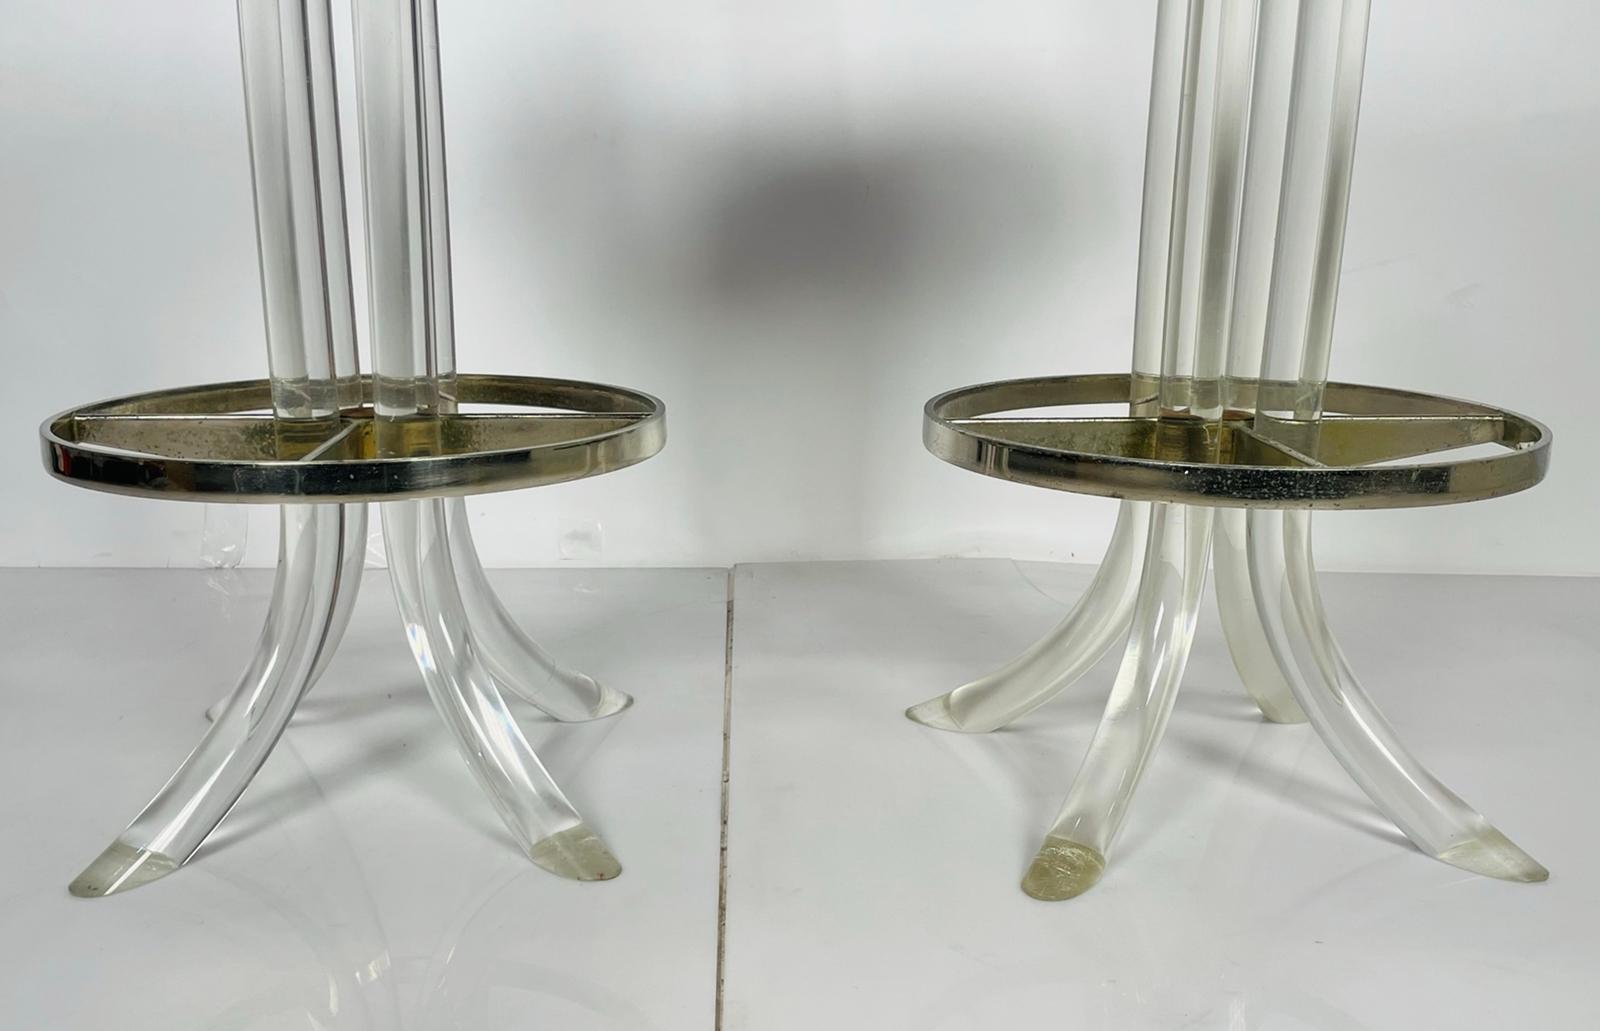 Pair of Lucite & Chrome Barstools After Charles Hollis Jones, USA 1970's For Sale 4